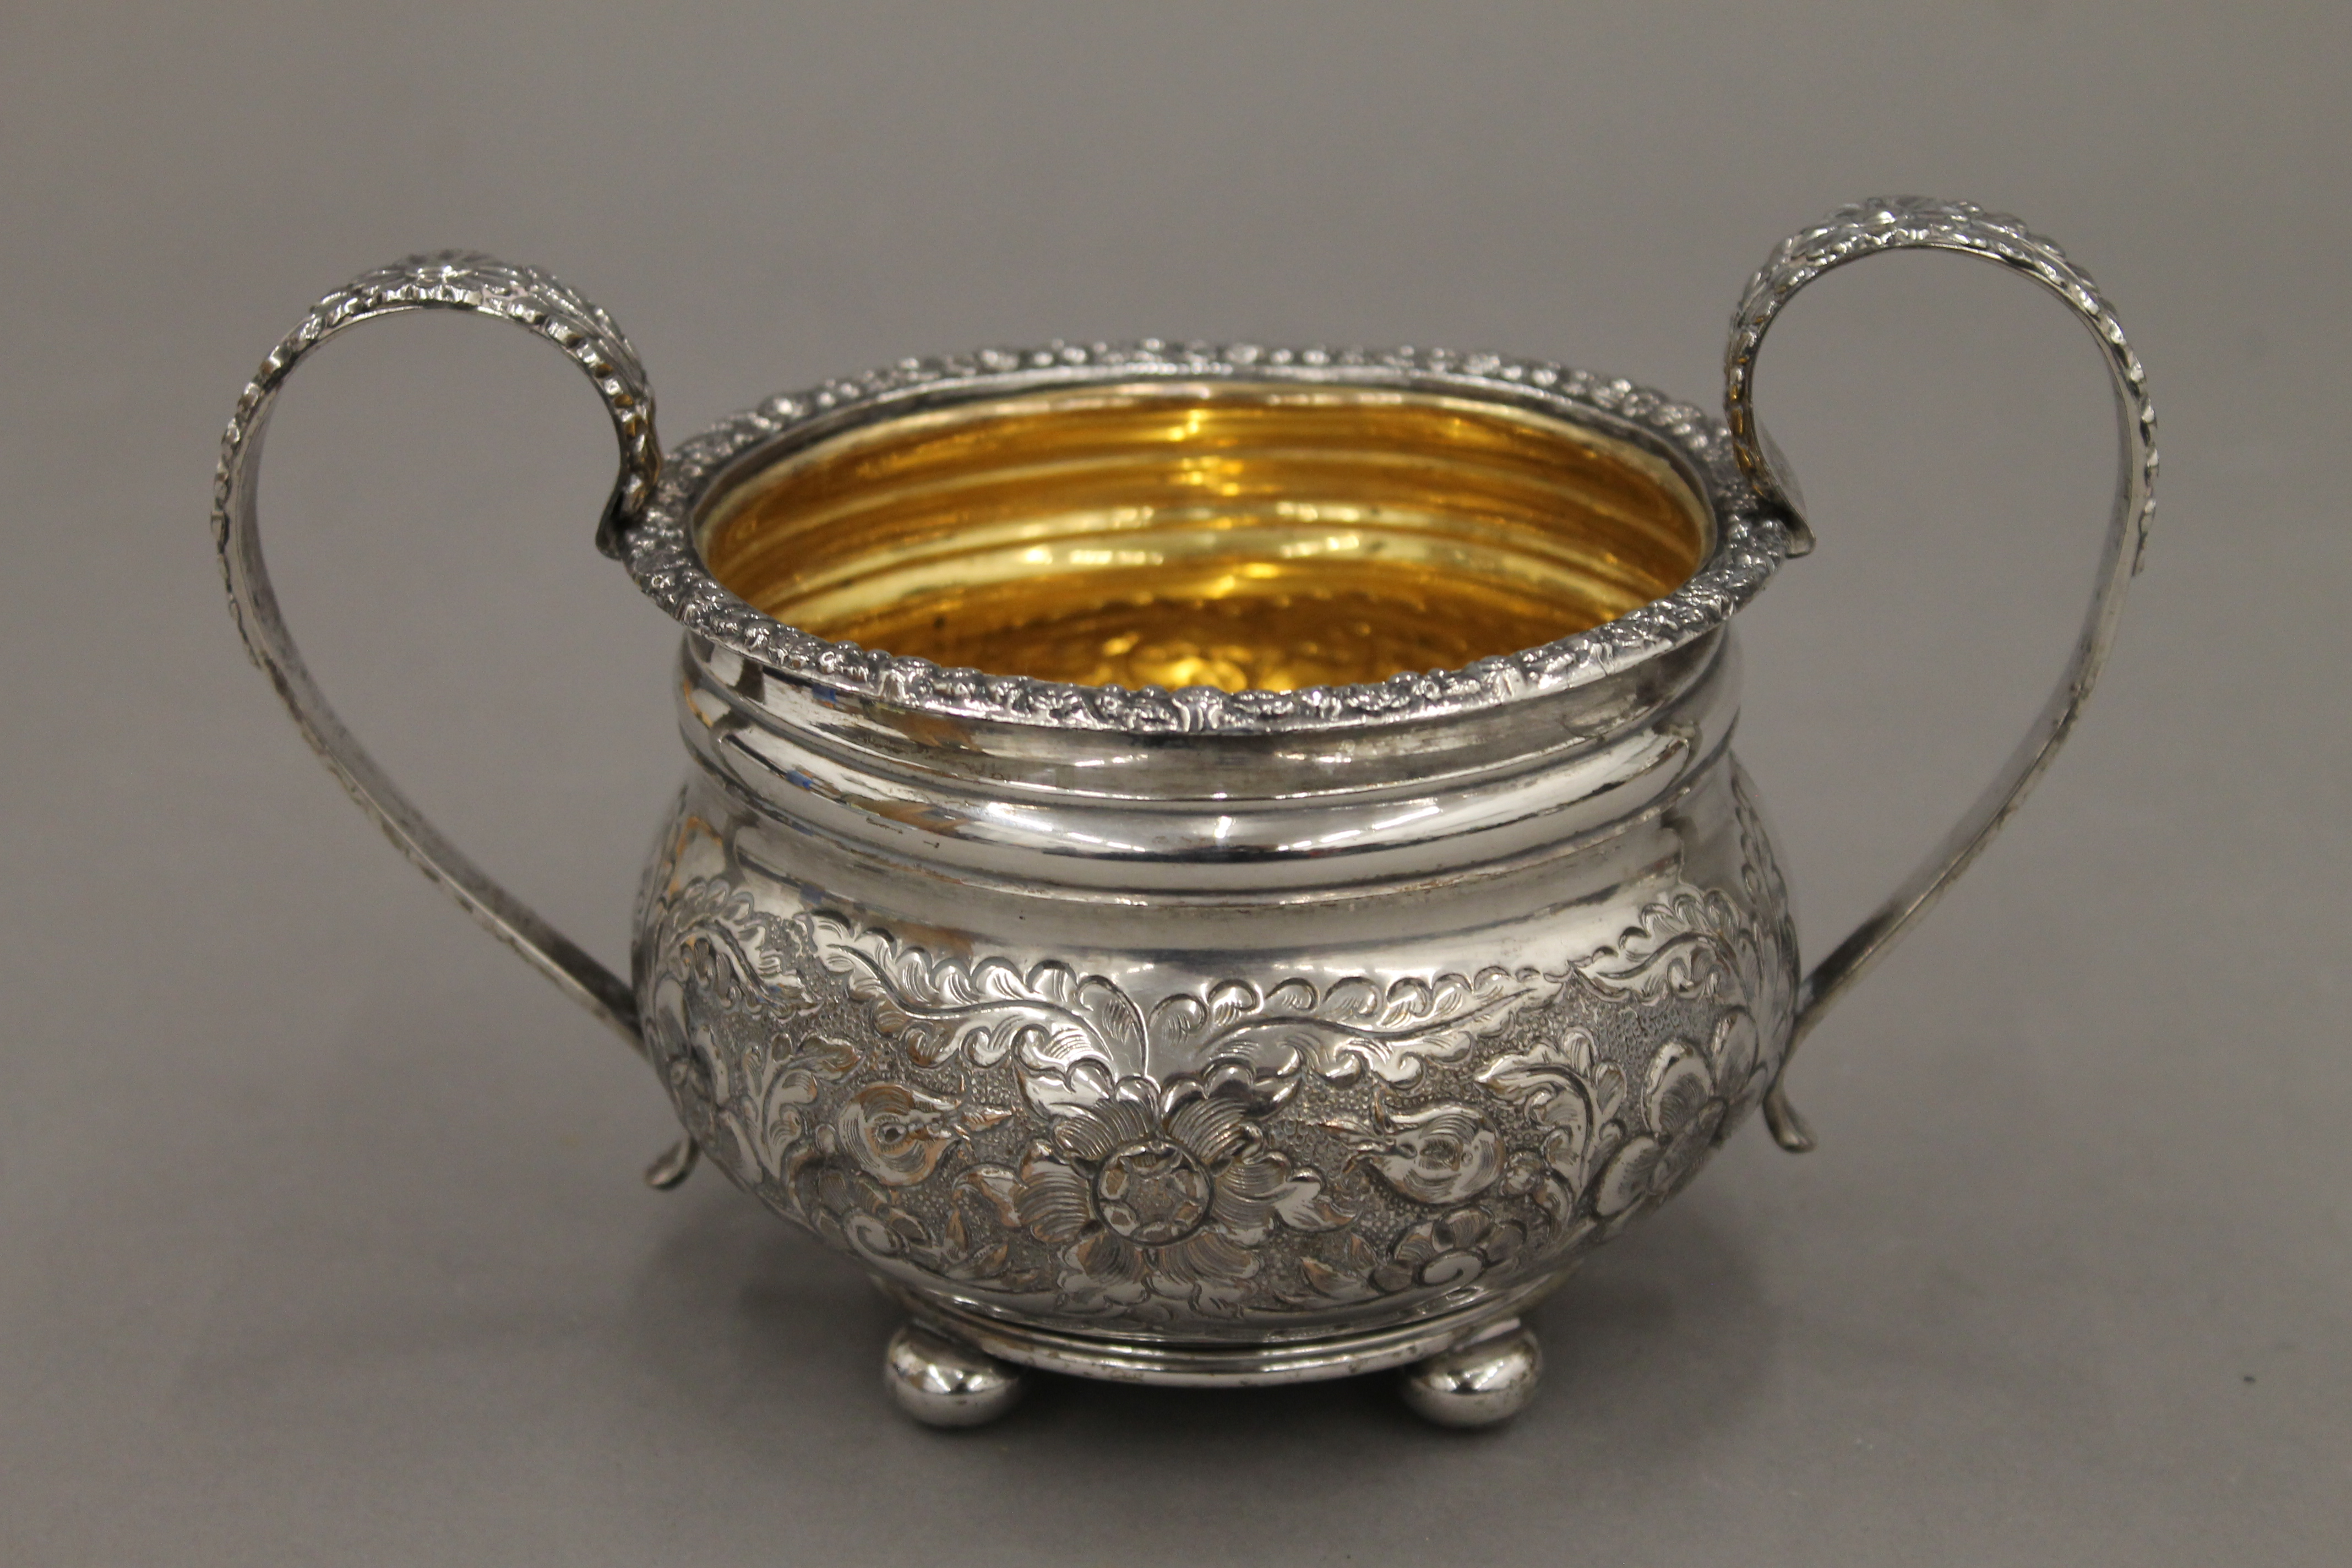 A Victorian three-piece ornate silver plated tea set and a tray. - Image 4 of 4